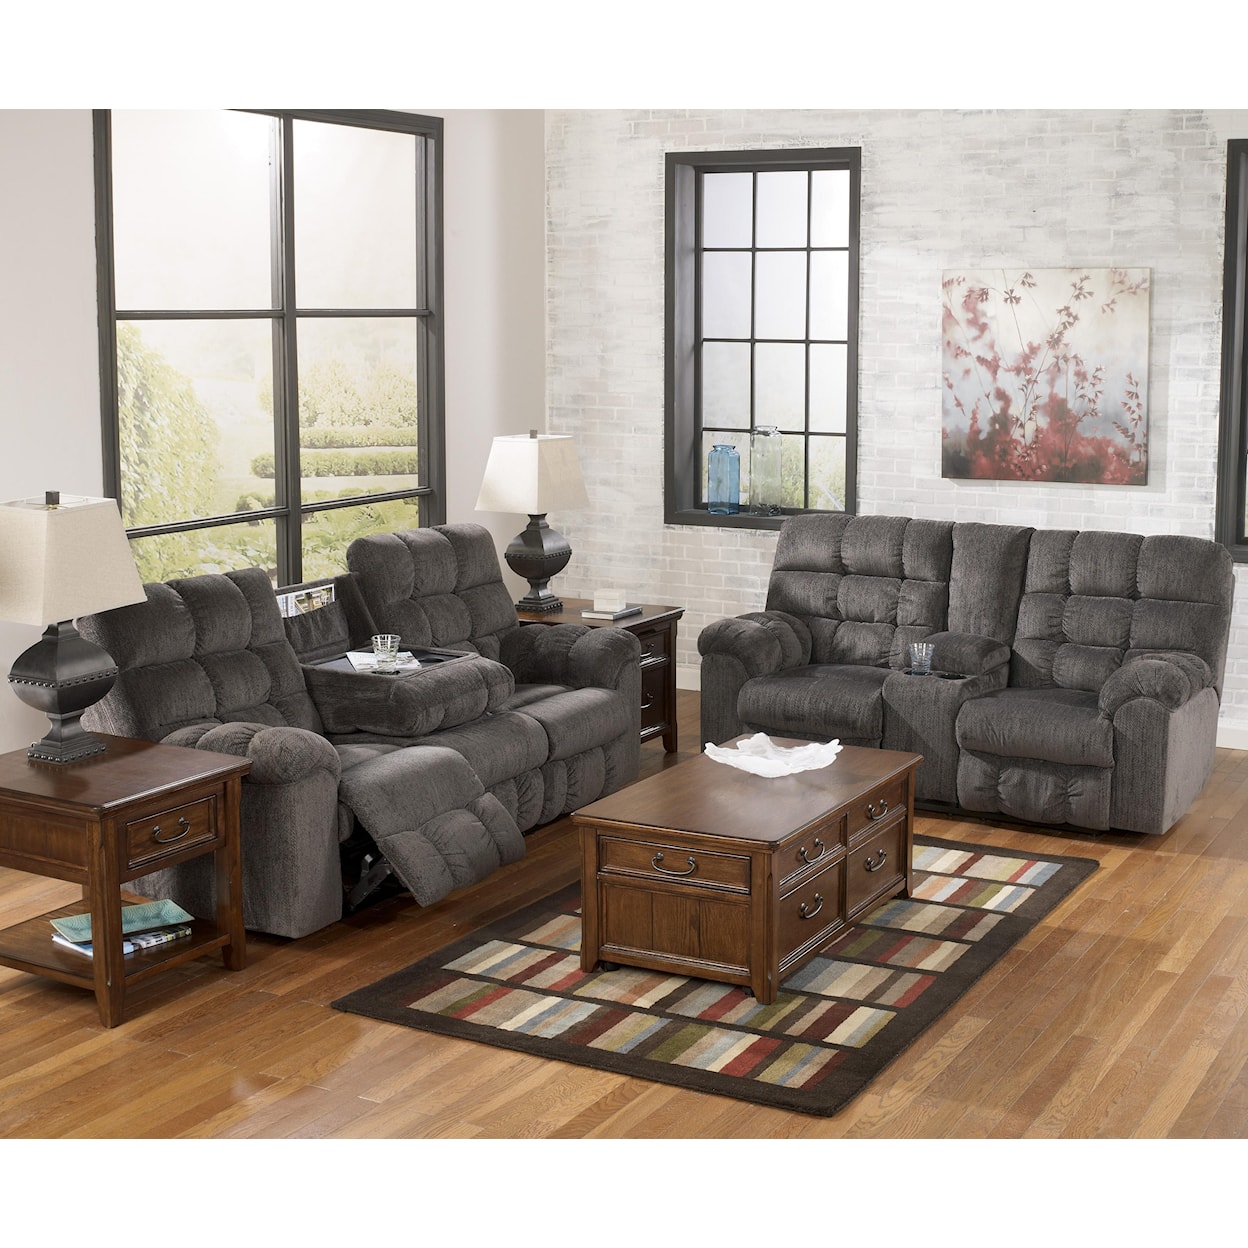 Signature Design by Ashley Acieona Double Reclining Loveseat with Console